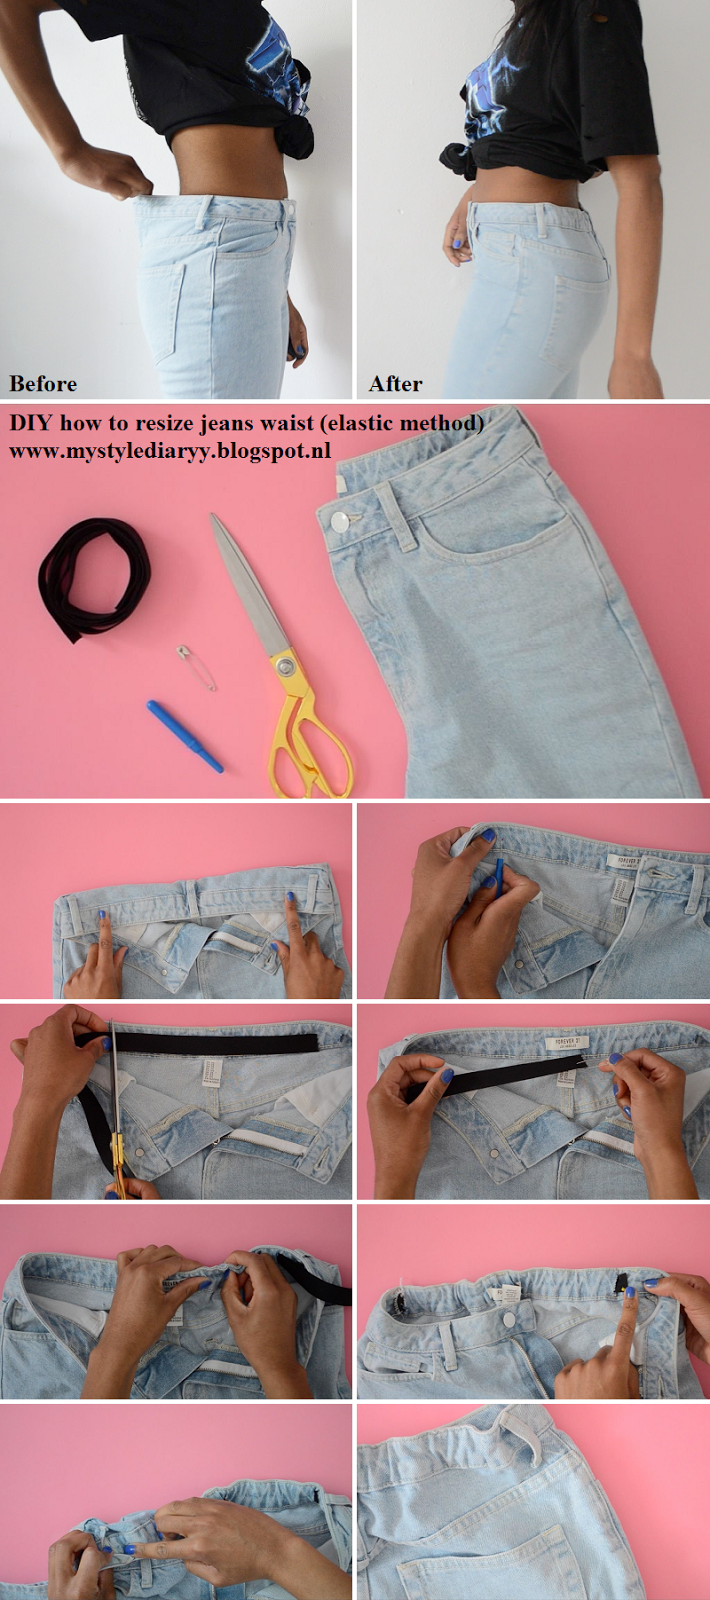 Quick Life Hack How To Resize Your Jeans Waist - Mystylediaryy-8191